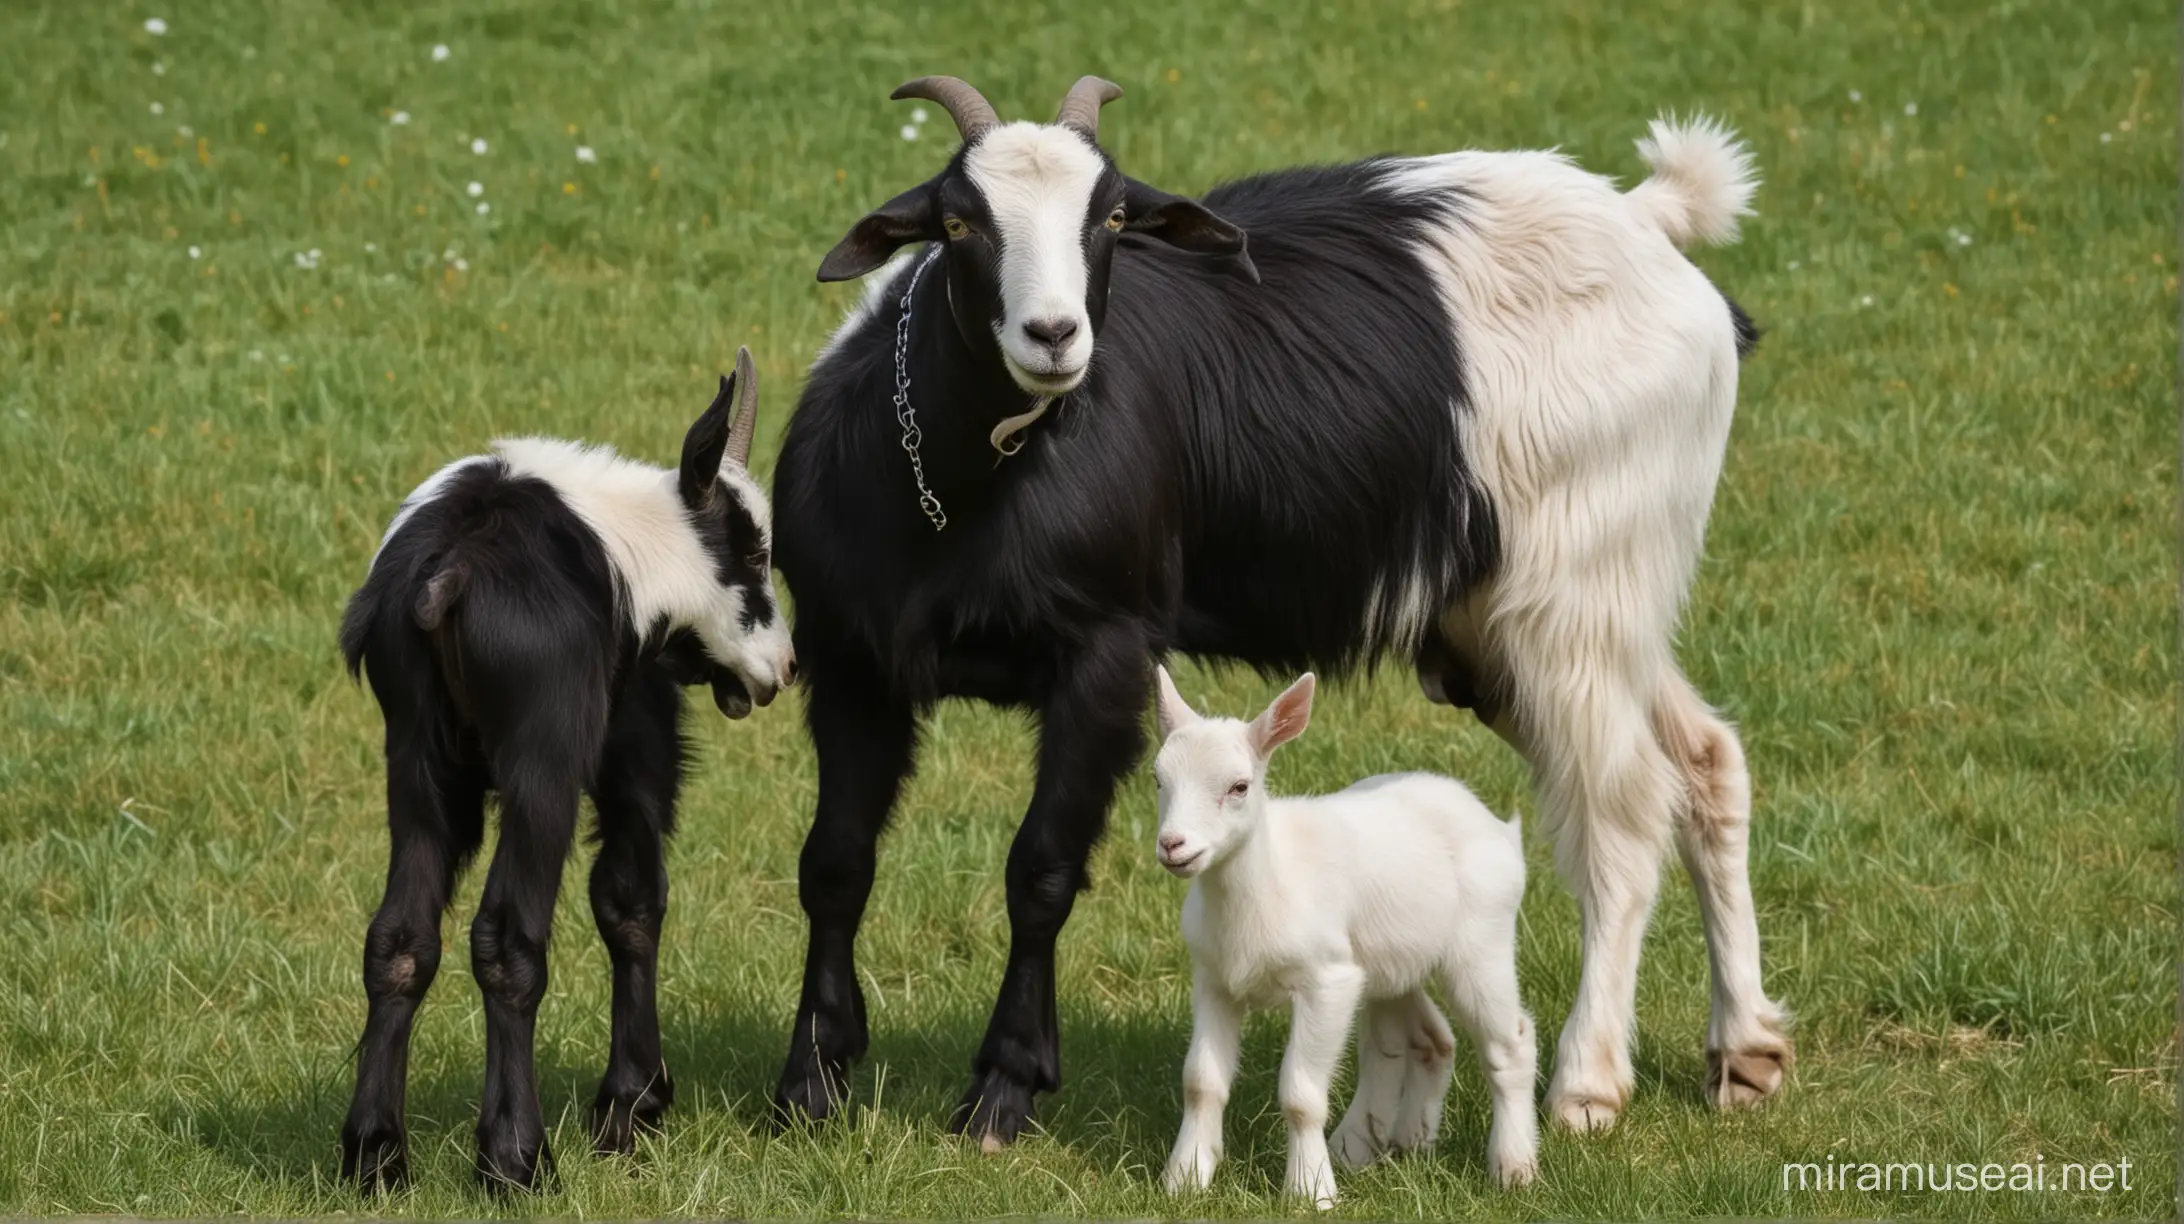 black goat with small white parts in its head and its body and her baby goat  in the filelds